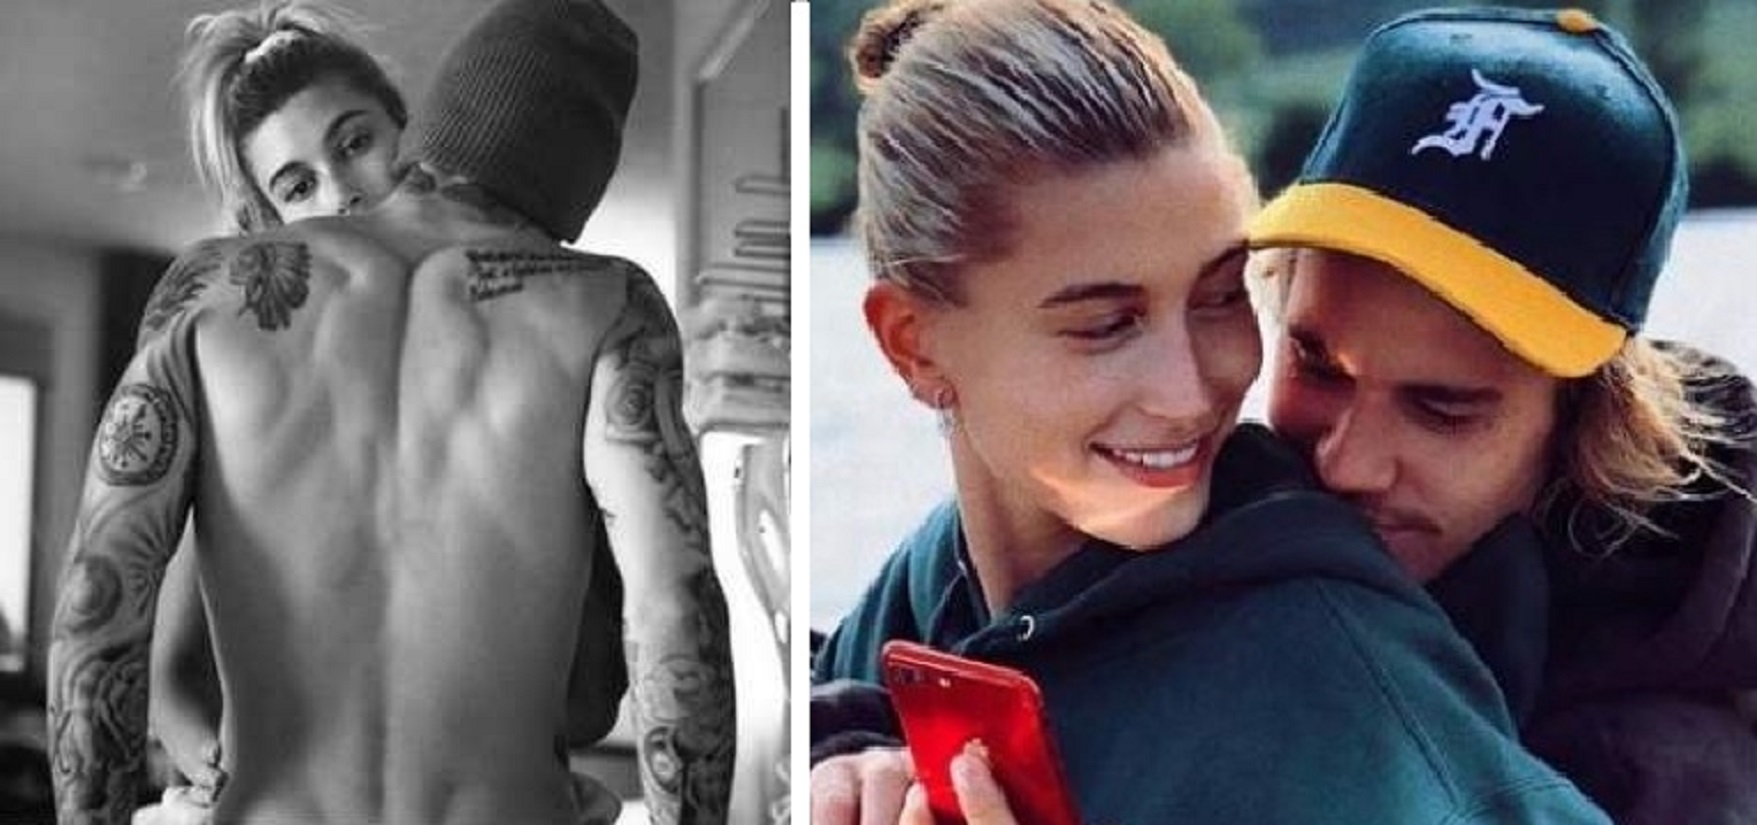 Justin Bieber Says Wife Hailey Is His Gift This Year in Steamy Pic